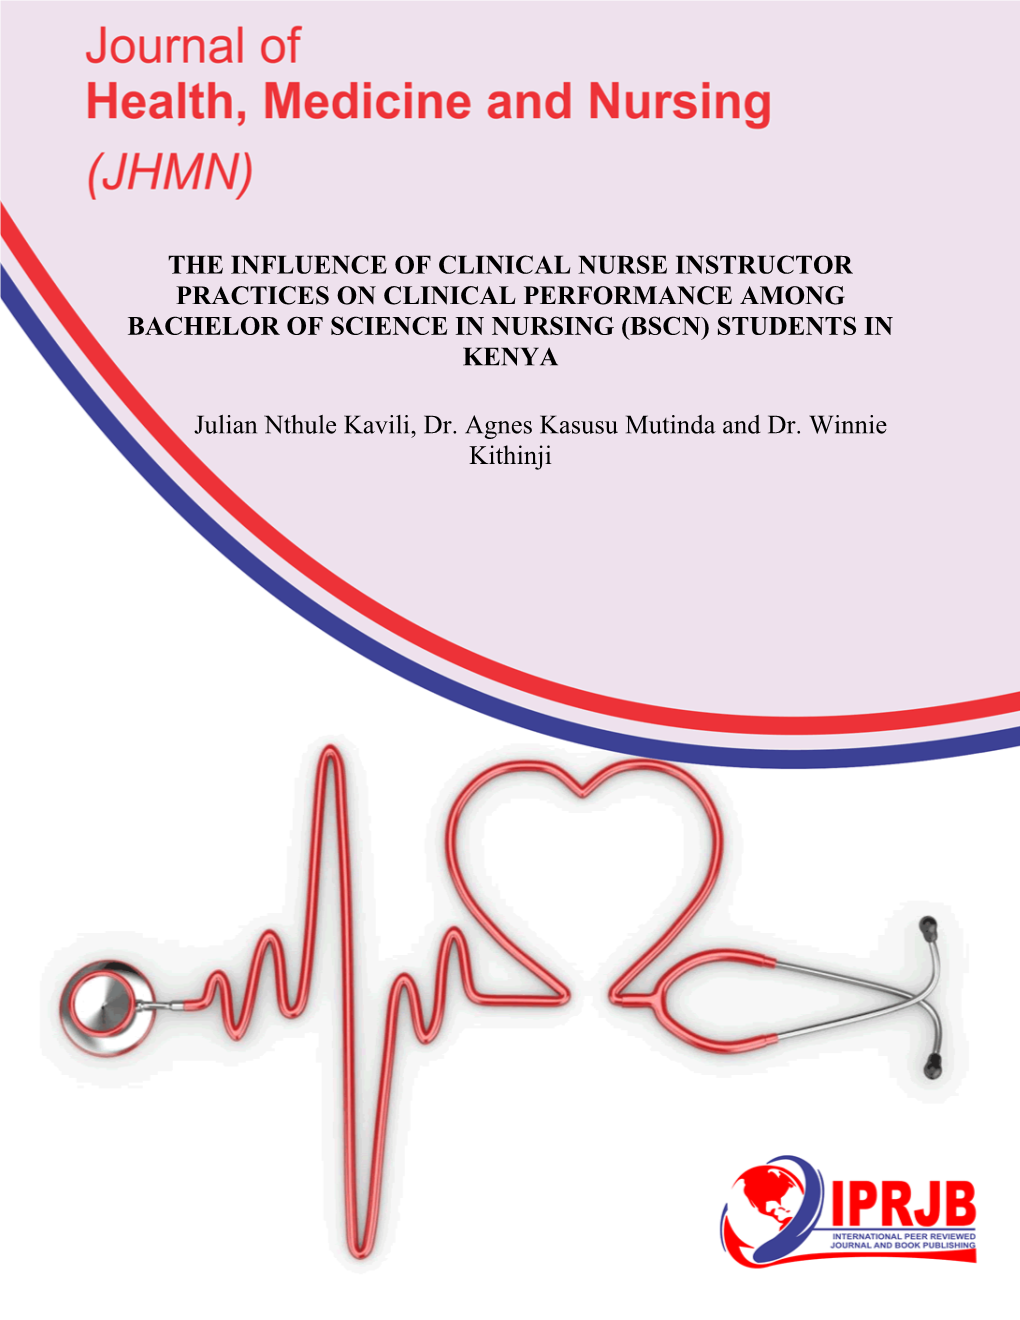 The Influence of Clinical Nurse Instructor Practices on Clinical Performance Among Bachelor of Science in Nursing (Bscn) Students in Kenya